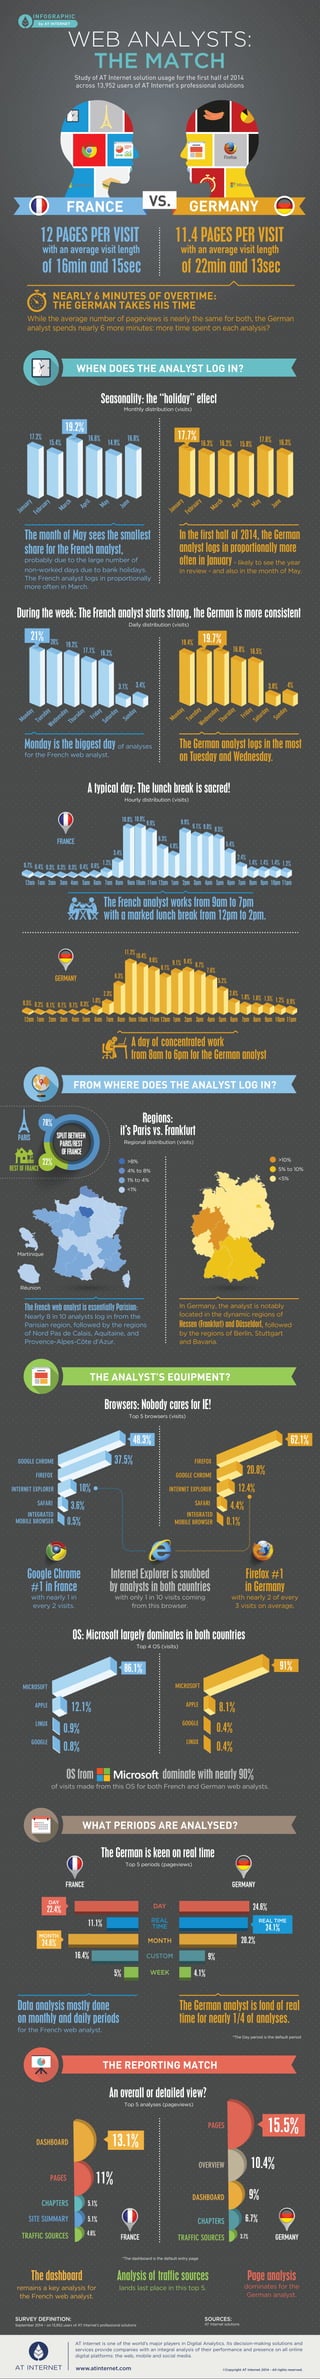 WEB ANALYSTS: 
THE MATCH 
Study of AT Internet solution usage for the first half of 2014 
across 13,952 users of AT Internet’s professional solutions 
INFOGRAPHIC 
by AT INTERNET 
FRANCE VS. GERMANY 
12 PAGES PER VISIT 
with an average visit length 
of 16min and 15sec 
11.4 PAGES PER VISIT 
with an average visit length 
of 22min and 13sec 
NEARLY 6 MINUTES OF OVERTIME: 
THE GERMAN TAKES HIS TIME 
While the average number of pageviews is nearly the same for both, the German 
analyst spends nearly 6 more minutes: more time spent on each analysis? 
WHEN DOES THE ANALYST LOG IN? 
Seasonality: the “holiday” effect 
Monthly distribution (visits) 
The month of May sees the smallest 
share for the French analyst, 
probably due to the large number of 
non-worked days due to bank holidays. 
The French analyst logs in proportionally 
more often in March. 
During the week: The French analyst starts strong, the German is more consistent 
Thursday 
Daily distribution (visits) 
Monday is the biggest day of analyses 
for the French web analyst. 
FRANCE 
In the first half of 2014, the German 
analyst logs in proportionally more 
often in January - likely to see the year 
in review - and also in the month of May. 
Thursday 
A typical day: The lunch break is sacred! 
0.7% 0.4% 0.3% 0.3% 0.3% 0.4% 0.6% 1.2% 
The German analyst logs in the most 
on Tuesday and Wednesday. 
Hourly distribution (visits) 
12am 1am 2am 3am 4am 5am 6am 7am 8am 9am 10am 11am 12pm 1pm 2pm 3pm 4pm 5pm 6pm 7pm 8pm 9pm 10pm 11pm 
0.5% 0.2% 0.1% 0.1% 0.1% 0.3% 1.0% 
2.3% 
10.8% 10.9% 
3.4% 
6.3% 
11.2% 
10.4% 
9.9% 
9.6% 
6.3% 
8.1% 
4.9% 
9.9% 
9.1% 9.0% 8.5% 
9.1% 9.4% 8.7% 
7.6% 
5.4% 
5.2% 
2.4% 
2.6% 
1.4% 1.4% 1.4% 1.2% 
1.8% 1.6% 1.5% 1.2% 0.9% 
12am 1am 2am 3am 4am 5am 6am 7am 8am 9am 10am 11am 12pm 1pm 2pm 3pm 4pm 5pm 6pm 7pm 8pm 9pm 10pm 11pm 
FROM WHERE DOES THE ANALYST LOG IN? 
it’s Paris vs. Frankfurt 
Regional distribution (visits) 
In Germany, the analyst is notably 
located in the dynamic regions of 
Hessen (Frankfurt) and Düsseldorf, followed 
by the regions of Berlin, Stuttgart 
and Bavaria. 
Regions: 
The French web analyst is essentially Parisian: 
Nearly 8 in 10 analysts log in from the 
Parisian region, followed by the regions 
of Nord Pas de Calais, Aquitaine, and 
Provence-Alpes-Côte d’Azur. 
THE ANALYST’S EQUIPMENT? 
Browsers: Nobody cares for IE! 
Top 5 browsers (visits) 
Firefox #1 
in Germany 
with nearly 2 of every 
3 visits on average. 
OS: Microsoft largely dominates in both countries 
Top 4 OS (visits) 
WHAT PERIODS ARE ANALYSED? 
17.2% 
15.4% 
16.6% 
14.9% 
16.8% 
January 
February 
March 
April 
May 
June 
16.3% 16.2% 17.6% 15.8% 16.3% 
January 
February 
March 
April 
May 
June 
GERMANY 
19.4% 
16.8% 16.5% 
3.8% 4% 
Monday 
Tuesday 
Wednesday 
Friday 
Saturday 
Sunday 
20% 19.2% 
17.1% 16.2% 
3.1% 3.4% 
Monday 
Tuesday 
Wednesday 
Friday 
Saturday 
Sunday 
The French analyst works from 9am to 7pm 
with a marked lunch break from 12pm to 2pm. 
A day of concentrated work 
from 8am to 6pm for the German analyst 
Martinique 
Réunion 
The German is keen on real time 
Top 5 periods (pageviews) 
FRANCE GERMANY 
The German analyst is fond of real 
time for nearly 1/4 of analyses. 
DAY 
22.4% 
Data analysis mostly done 
on monthly and daily periods 
for the French web analyst. 
DAY 
MONTH 
THE REPORTING MATCH 
An overall or detailed view? 
Top 5 analyses (pageviews) 
10.4% 
AT Internet is one of the world’s major players in Digital Analytics. Its decision-making solutions and 
services provide companies with an integral analysis of their performance and presence on all online 
digital platforms: the web, mobile and social media. 
www.atinternet.com ©Copyright AT Internet 2014 - All rights reserved. 
78% 
22% 
SPLIT BETWEEN 
PARIS/REST 
OF FRANCE 
PARIS 
REST OF FRANCE 
GOOGLE CHROME 
FIREFOX 
INTERNET EXPLORER 
SAFARI 
INTEGRATED 
MOBILE BROWSER 
FIREFOX 
GOOGLE CHROME 
INTERNET EXPLORER 
SAFARI 
INTEGRATED 
MOBILE BROWSER 
Google Chrome 
#1 in France 
with nearly 1 in 
every 2 visits. 
Internet Explorer is snubbed 
by analysts in both countries 
with only 1 in 10 visits coming 
from this browser. 
OS from dominate with nearly 90% 
of visits made from this OS for both French and German web analysts. 
MICROSOFT 
APPLE 
LINUX 
GOOGLE 
MICROSOFT 
APPLE 
GOOGLE 
LINUX 
*The Day period is the default period 
*The dashboard is the default entry page 
The dashboard 
remains a key analysis for 
the French web analyst. 
Analysis of traffic sources 
lands last place in this top 5. 
Page analysis 
dominates for the 
German analyst. 
48.3% 
91% 
8.1% 
0.4% 
0.4% 
12.1% 
0.9% 
0.8% 
37.5% 
10% 
3.6% 
0.5% 
62.1% 
20.8% 
12.4% 
4.4% 
0.1% 
SURVEY DEFINITION: 
September 2014 – on 13,952 users of AT Internet’s professional solutions 
SOURCES: 
AT Internet solutions 
86.1% 
19.2% 
17.7% 
21% 19.7% 
>10% 
5% to 10% 
<5% 
>8% 
4% to 8% 
1% to 4% 
<1% 
REAL TIME 
24.1% 
GERMANY 
MONTH 
24.6% 
FRANCE 
DASHBOARD 
PAGES 
CHAPTERS 
SITE SUMMARY 
TRAFFIC SOURCES 
13.1% 
11% 
5.1% 
5.1% 
4.6% 
PAGES 
OVERVIEW 
DASHBOARD 
CHAPTERS 
TRAFFIC SOURCES 
15.5% 
9% 
6.7% 
3.7% 
REAL 
TIME 
CUSTOM 
WEEK 
24.6% 
4.1% 
20.2% 
16.4% 9% 
5% 
11.1% 
